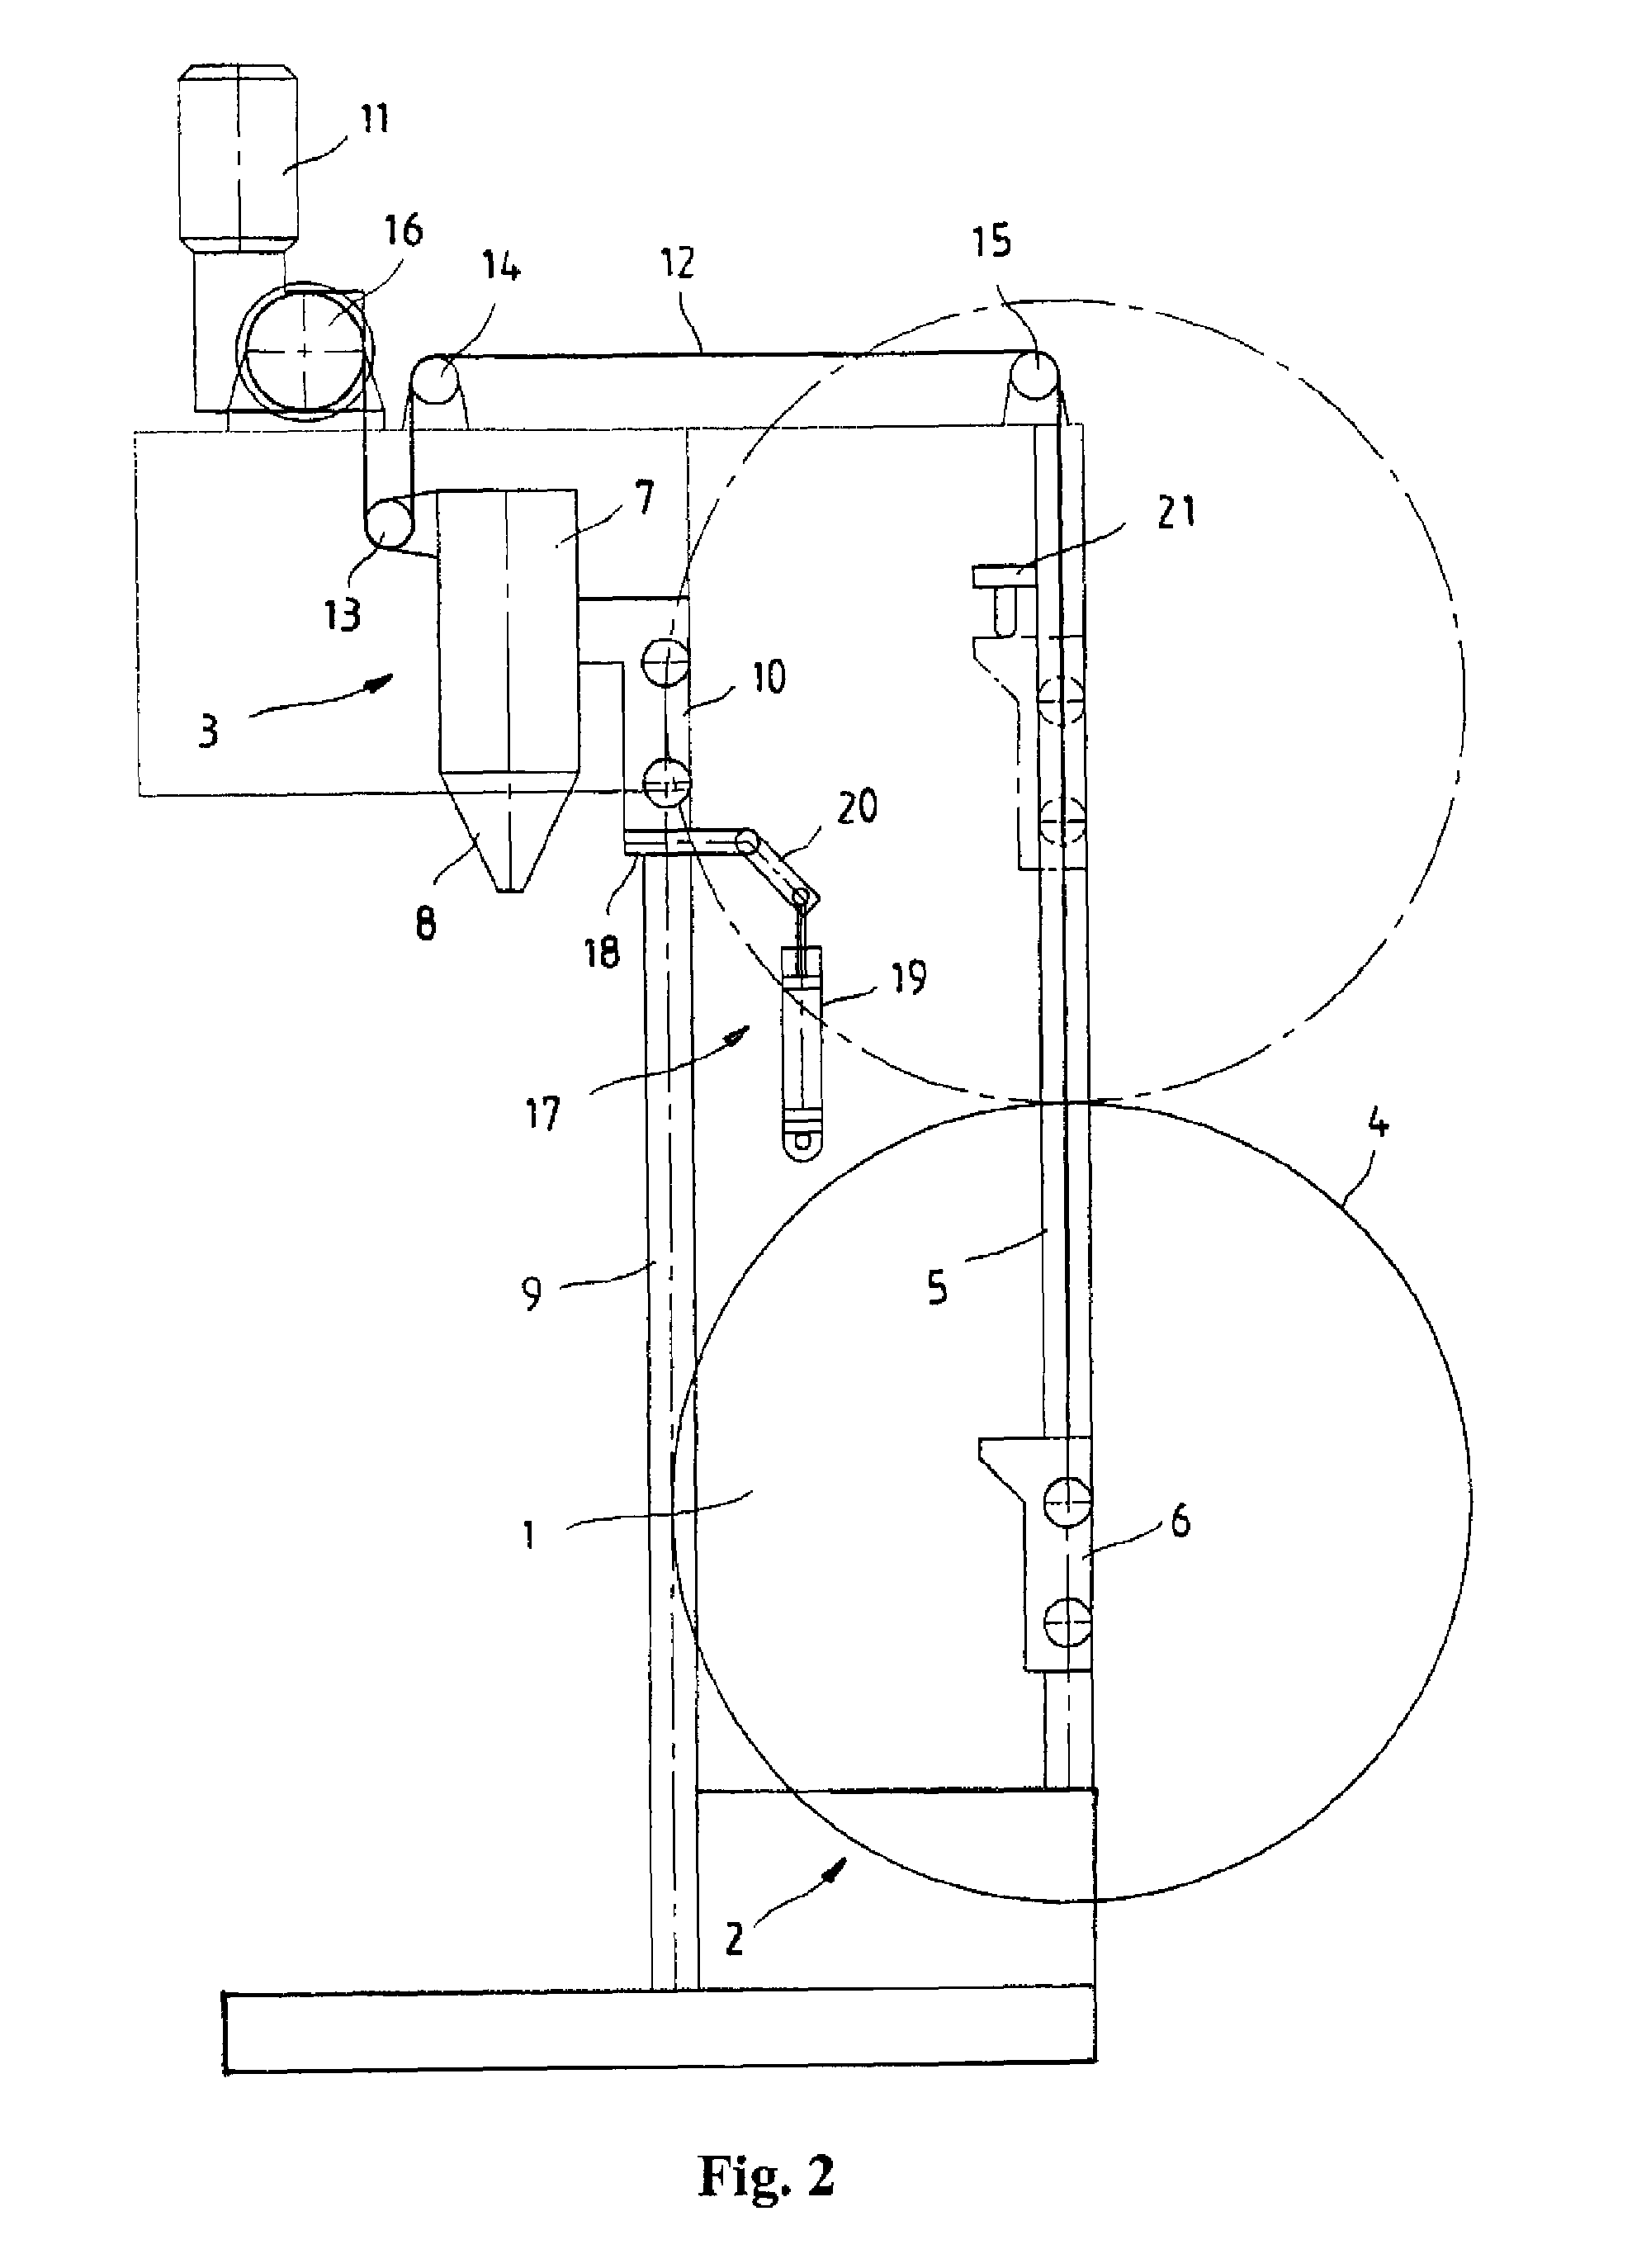 Vehicle wash system comprising a plurality of treatment units